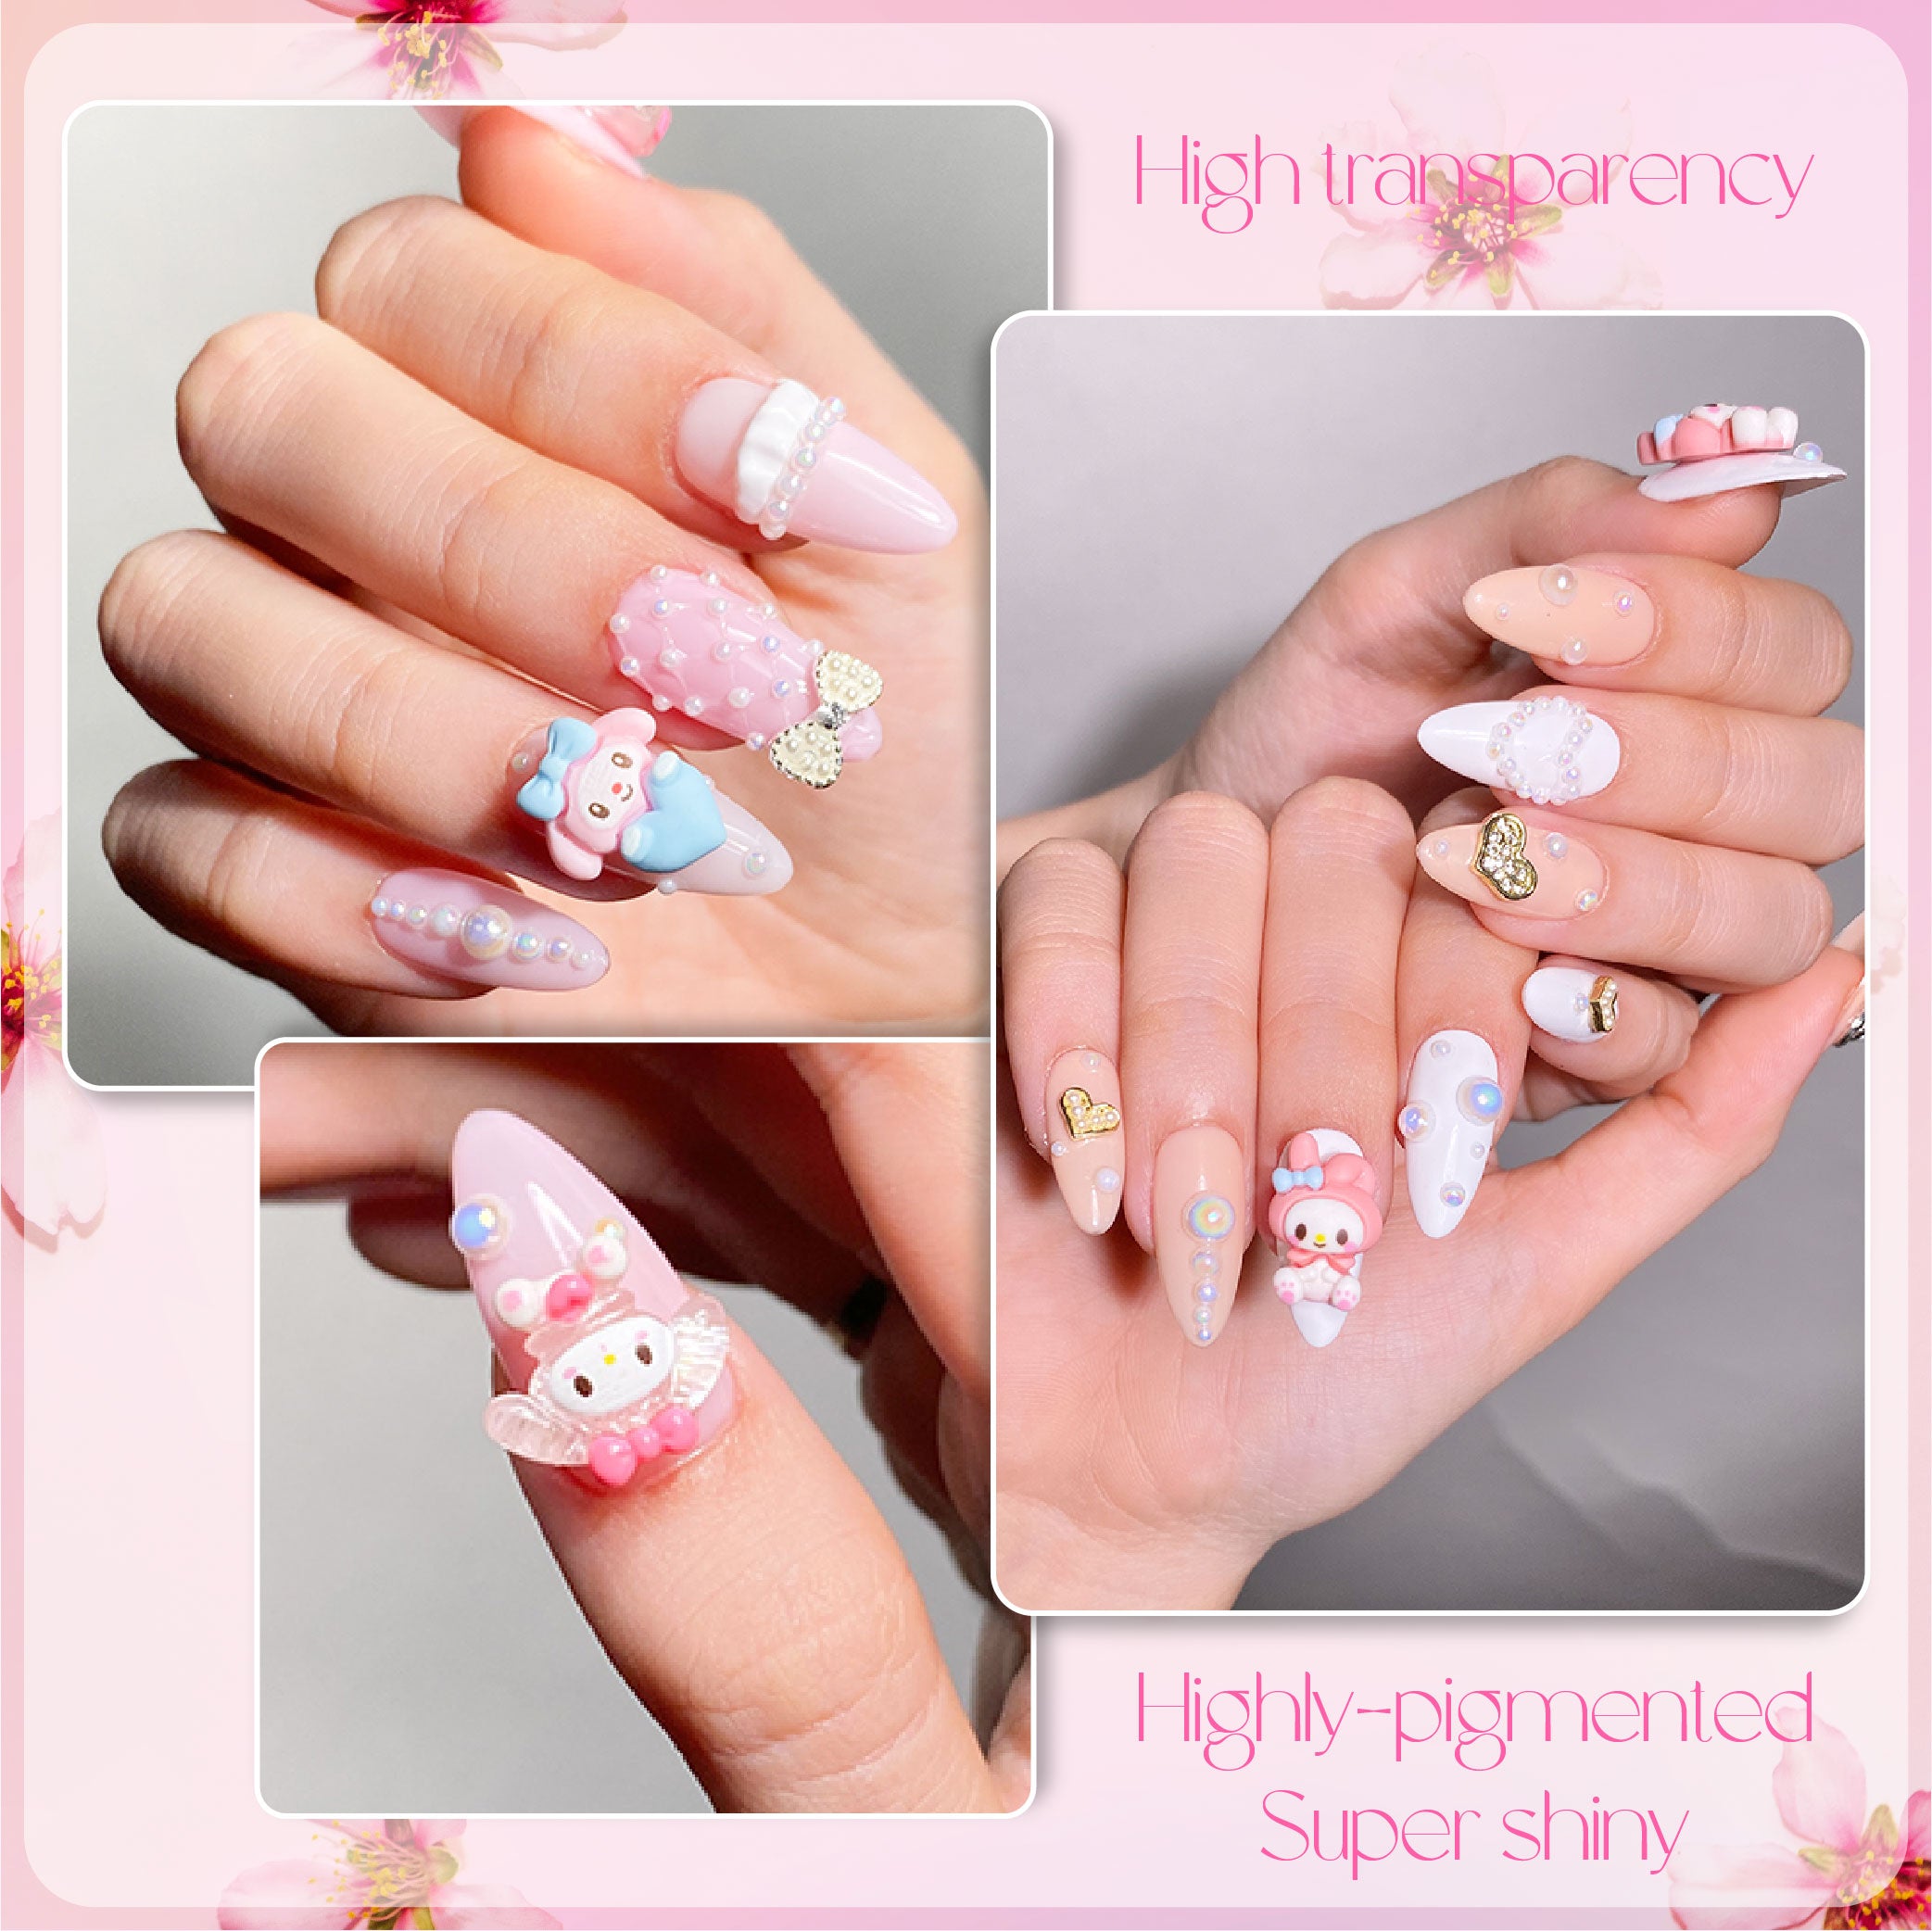 LDS BP - 01 - Blossom Pink Collection